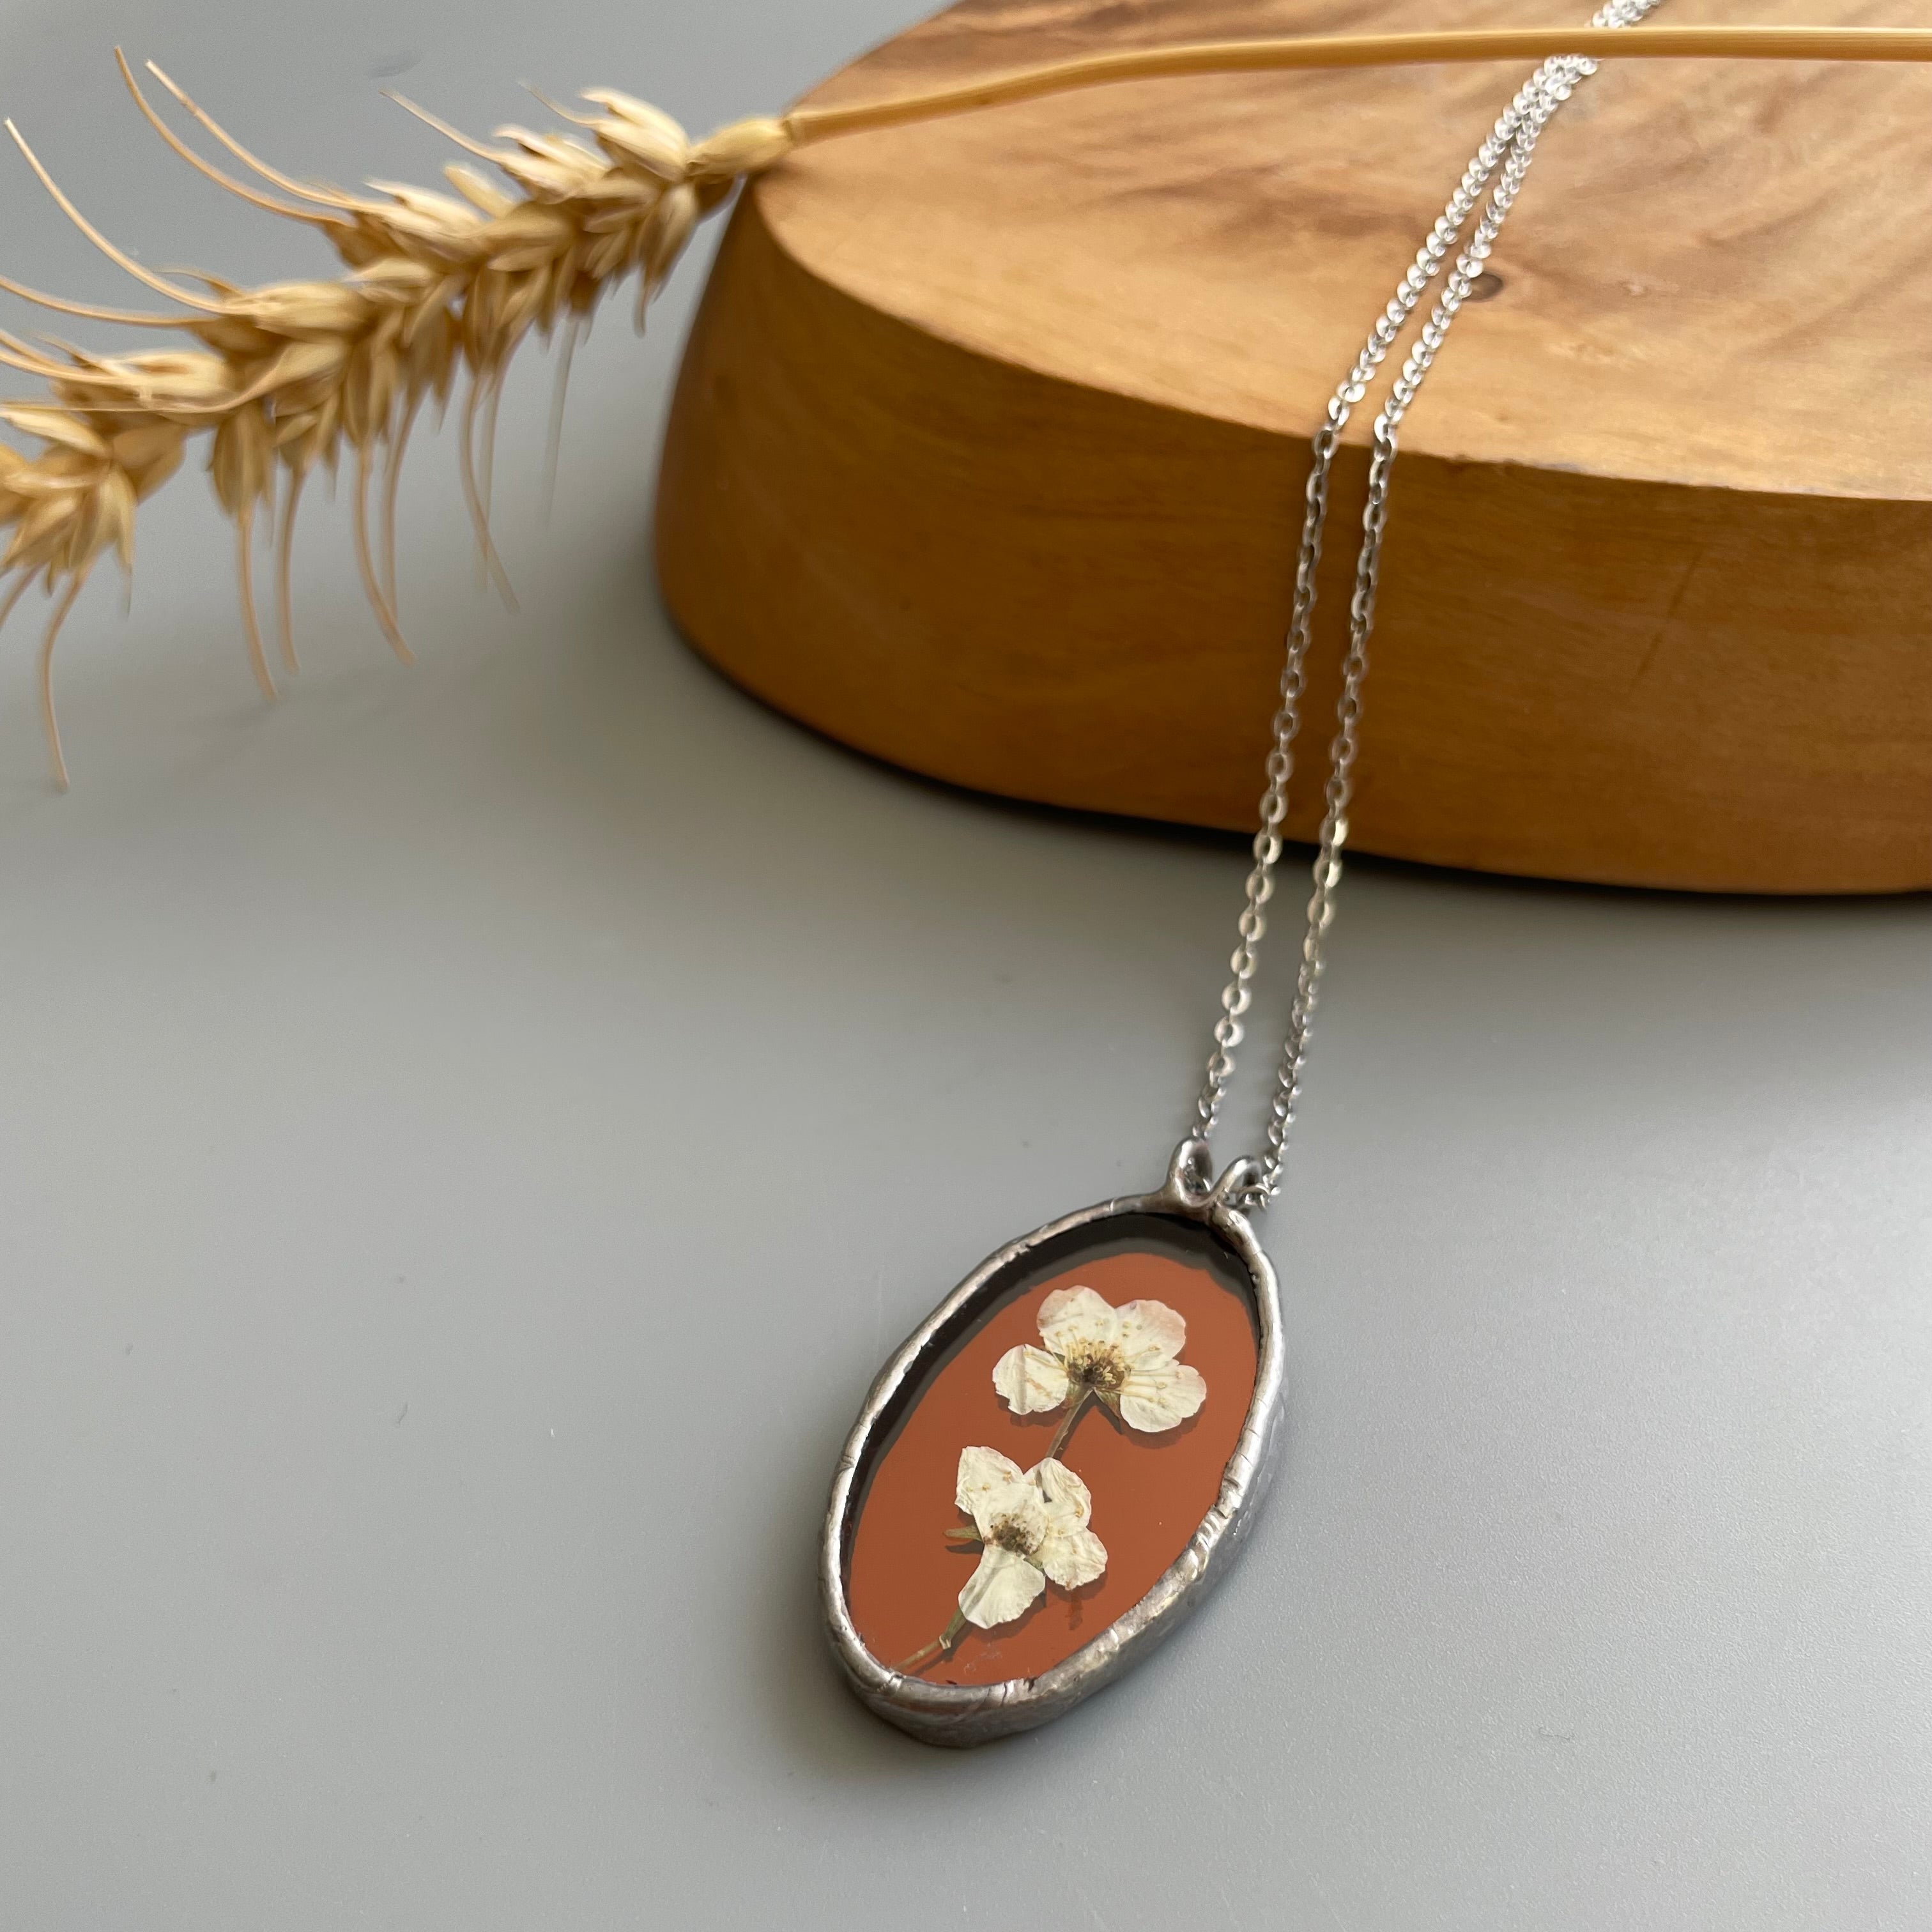 Oval Shaped Stain Glass Necklace with Dried Flower